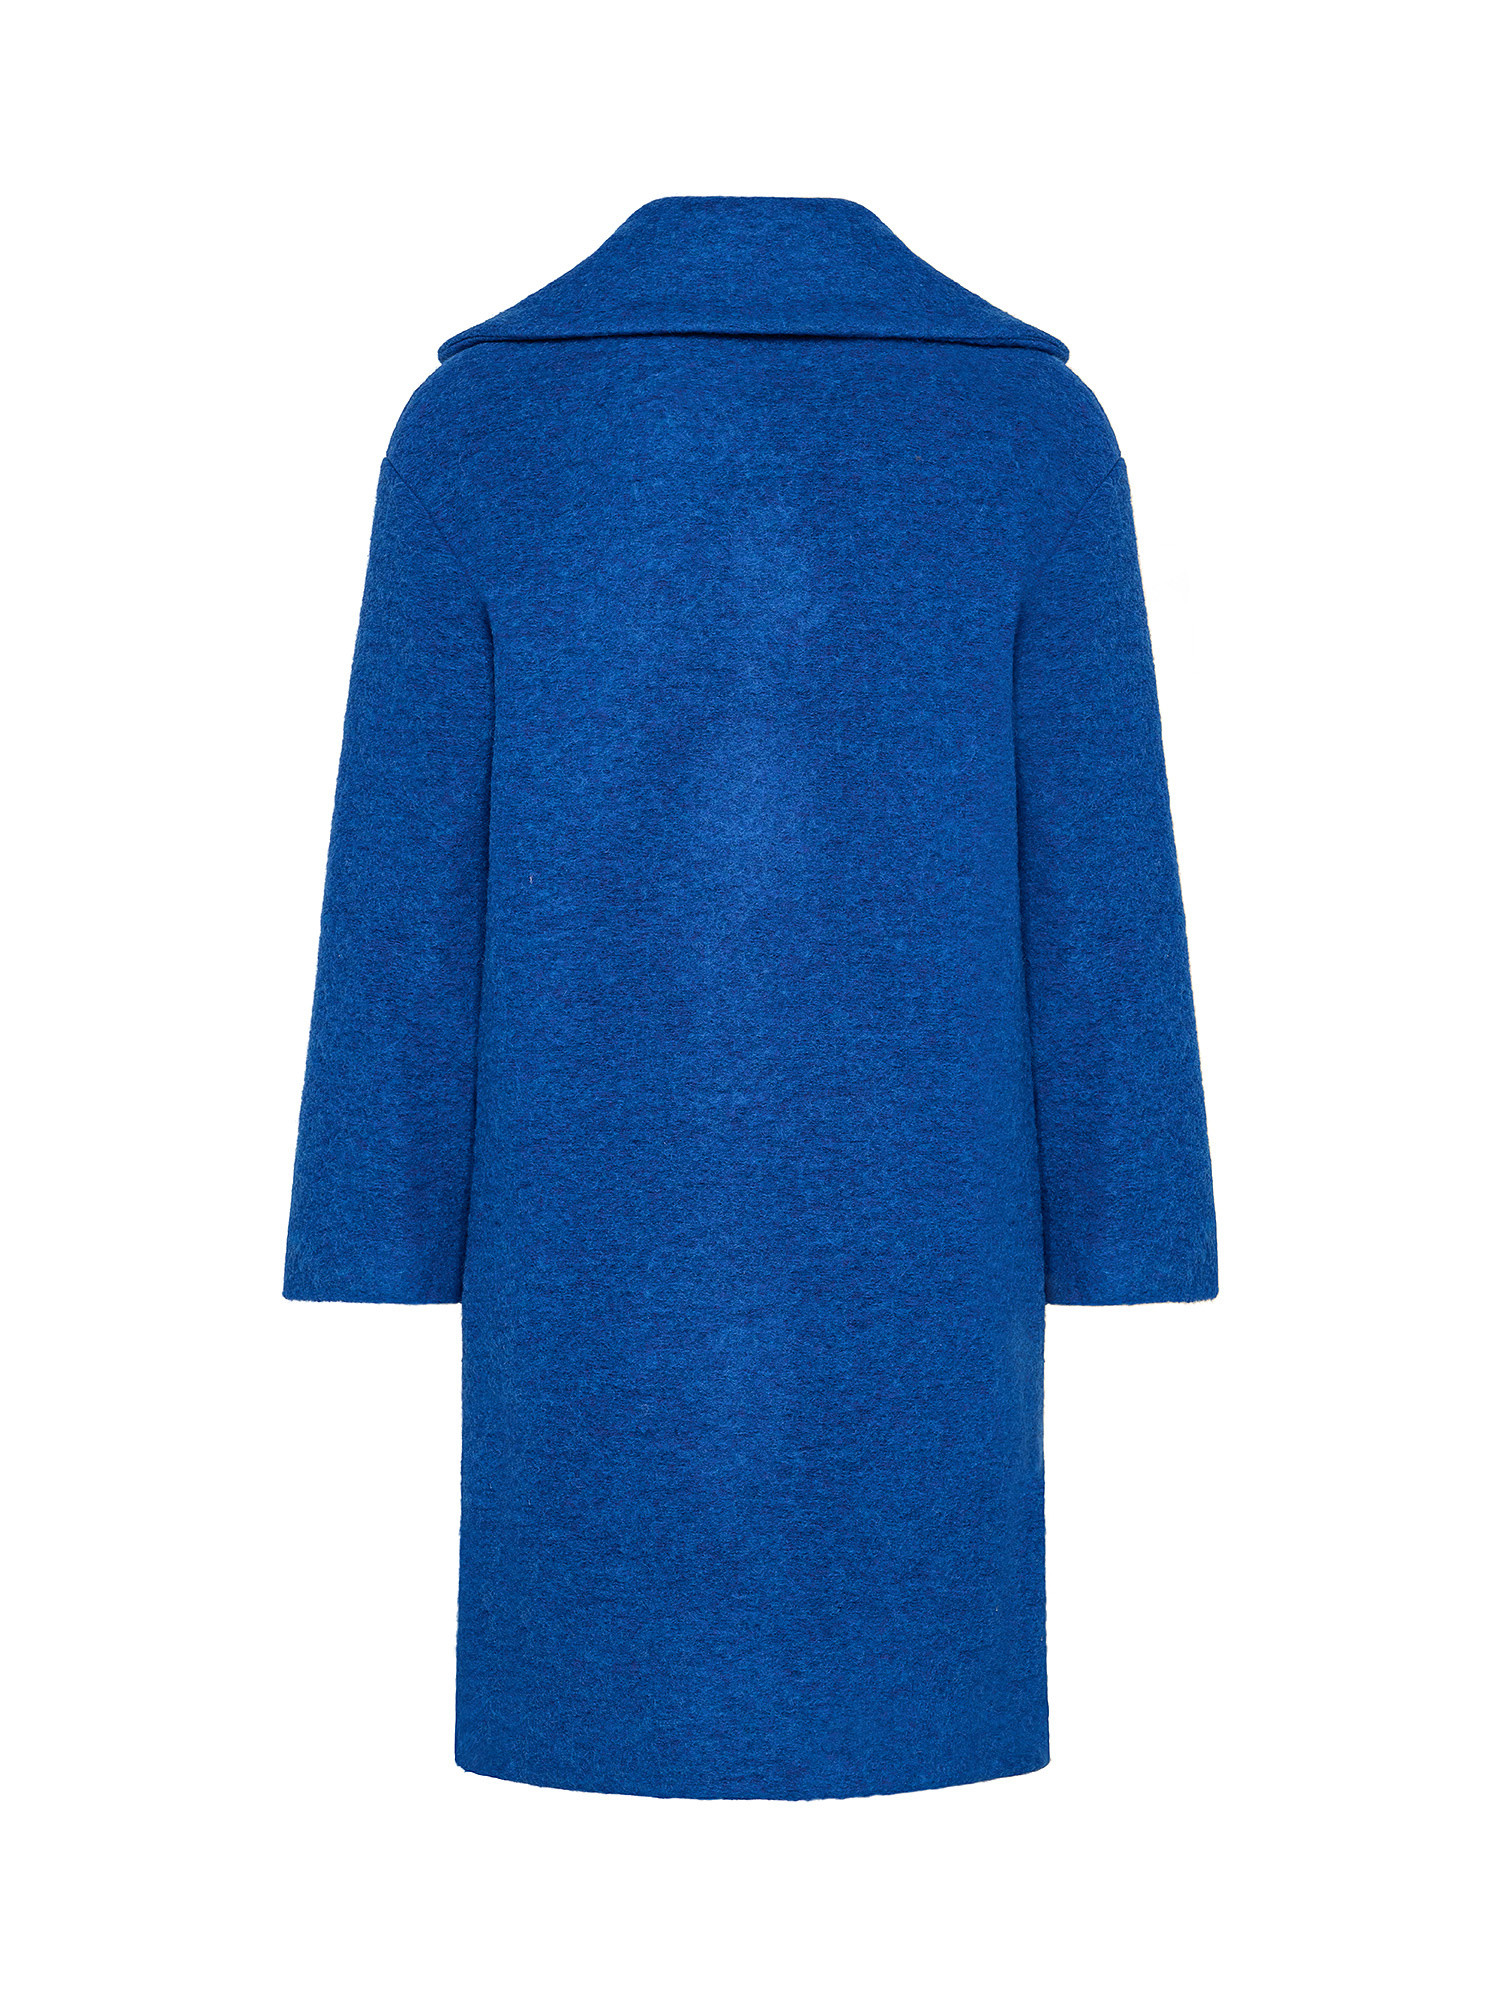 Cappotto in lana cotta, Blu royal, large image number 1